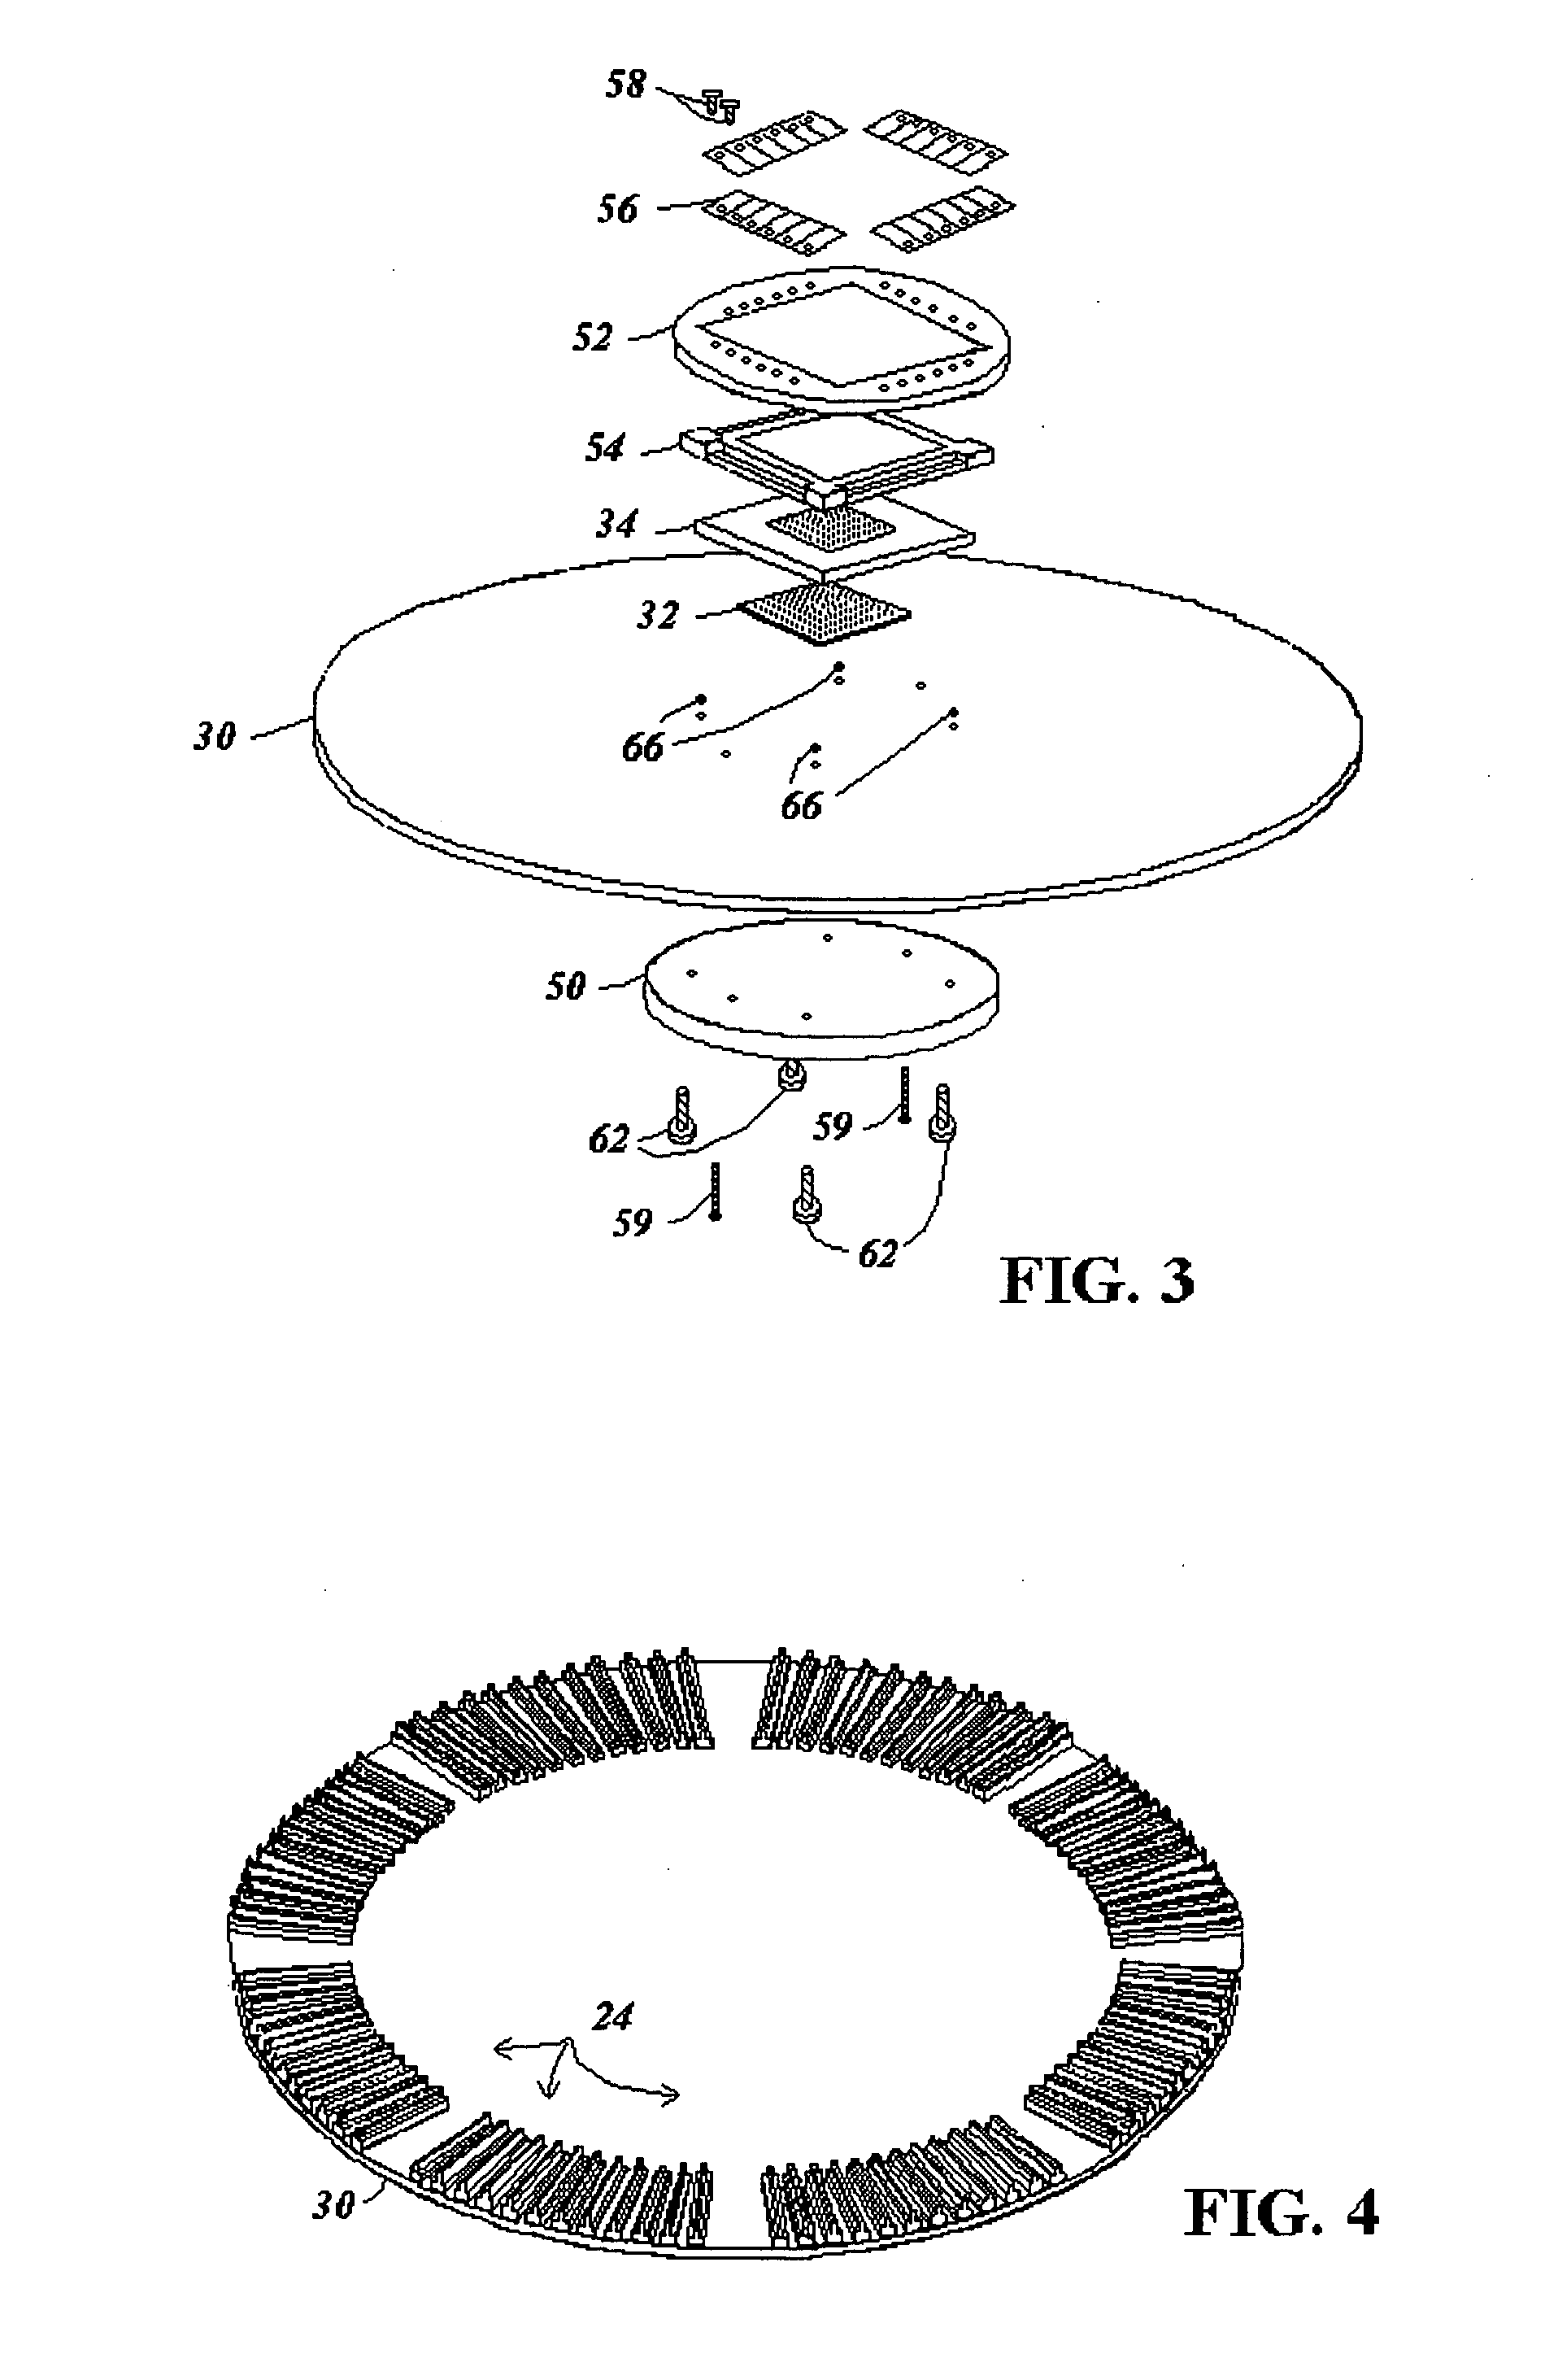 Active diagnostic interface for wafer probe applications